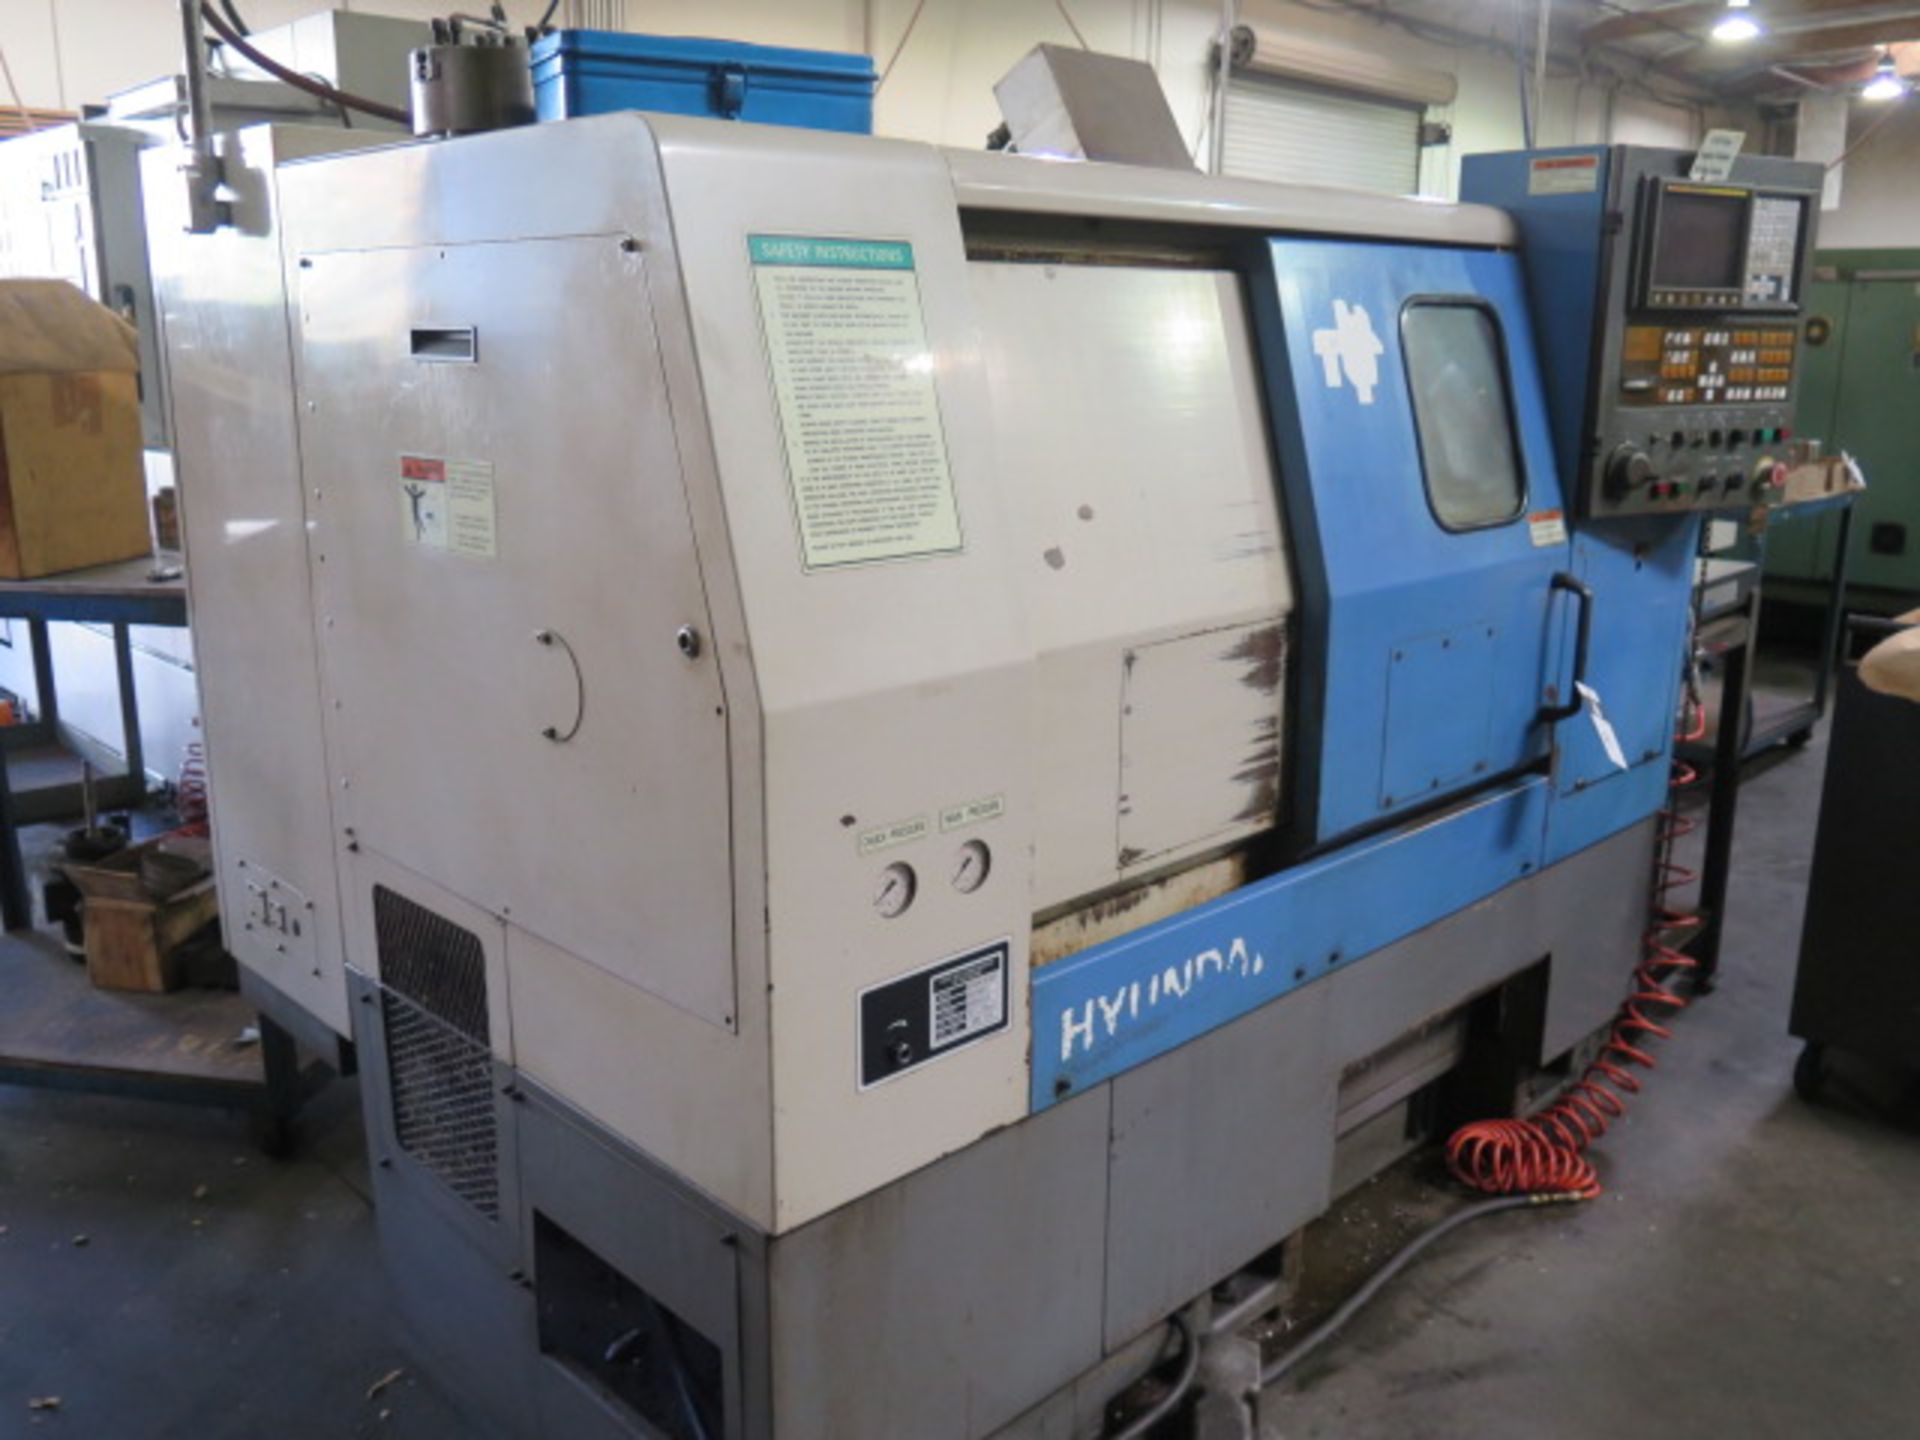 2000 Hyundai HIT0400G CNC Cross Slide Lathe s/n 1200A136 w/ Fanuc Series 21-T Controls, SOLD AS IS - Image 3 of 12